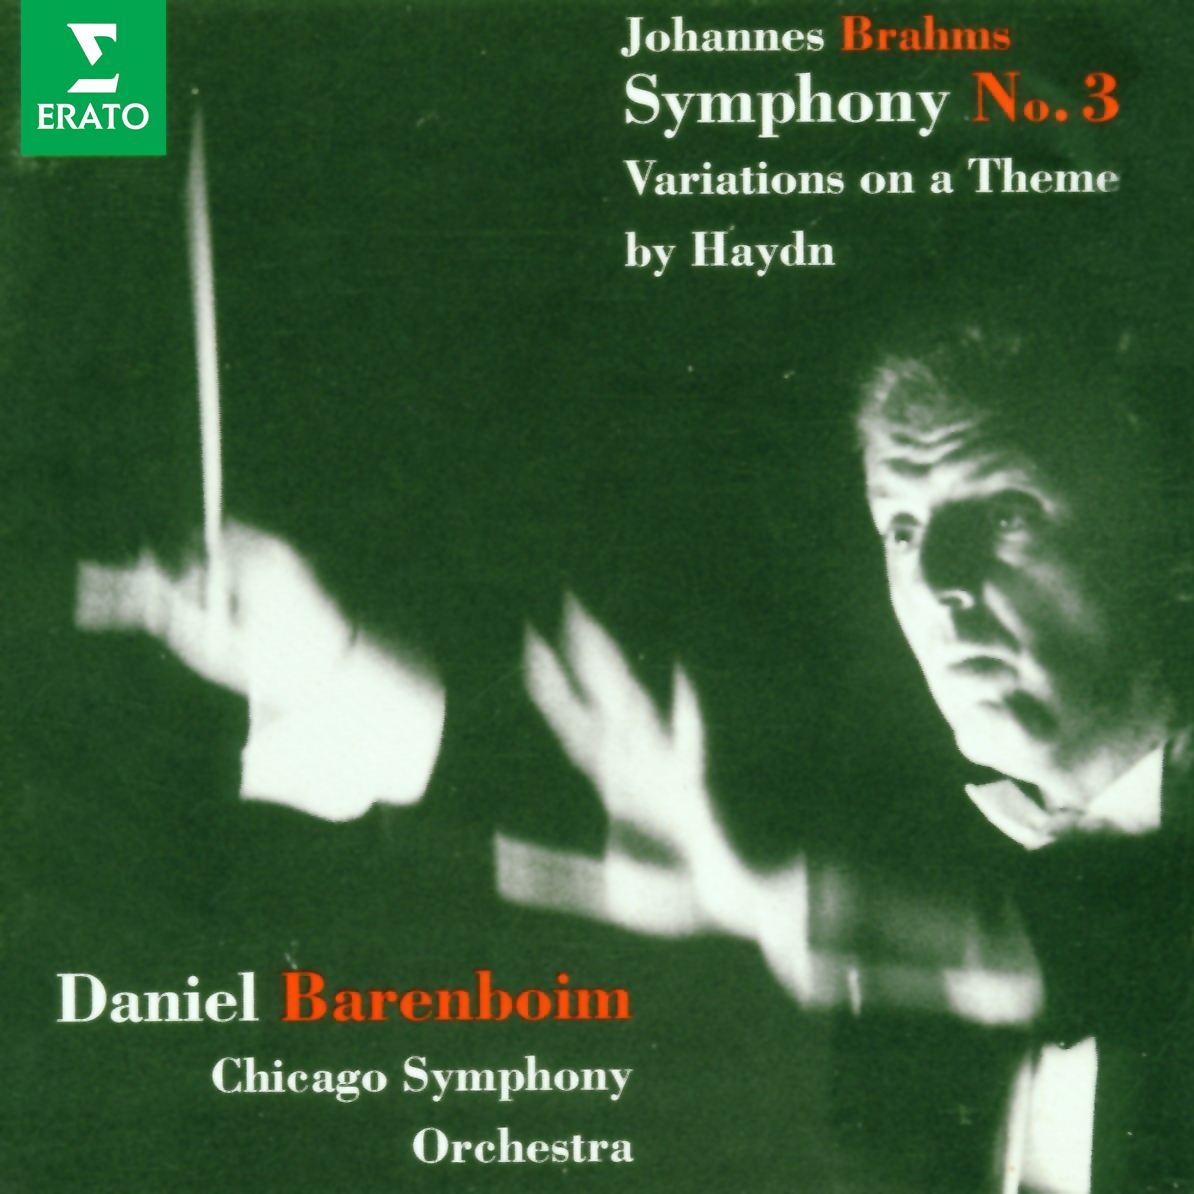 Brahms: Symphony No. 3, Variations on a Theme by Haydn